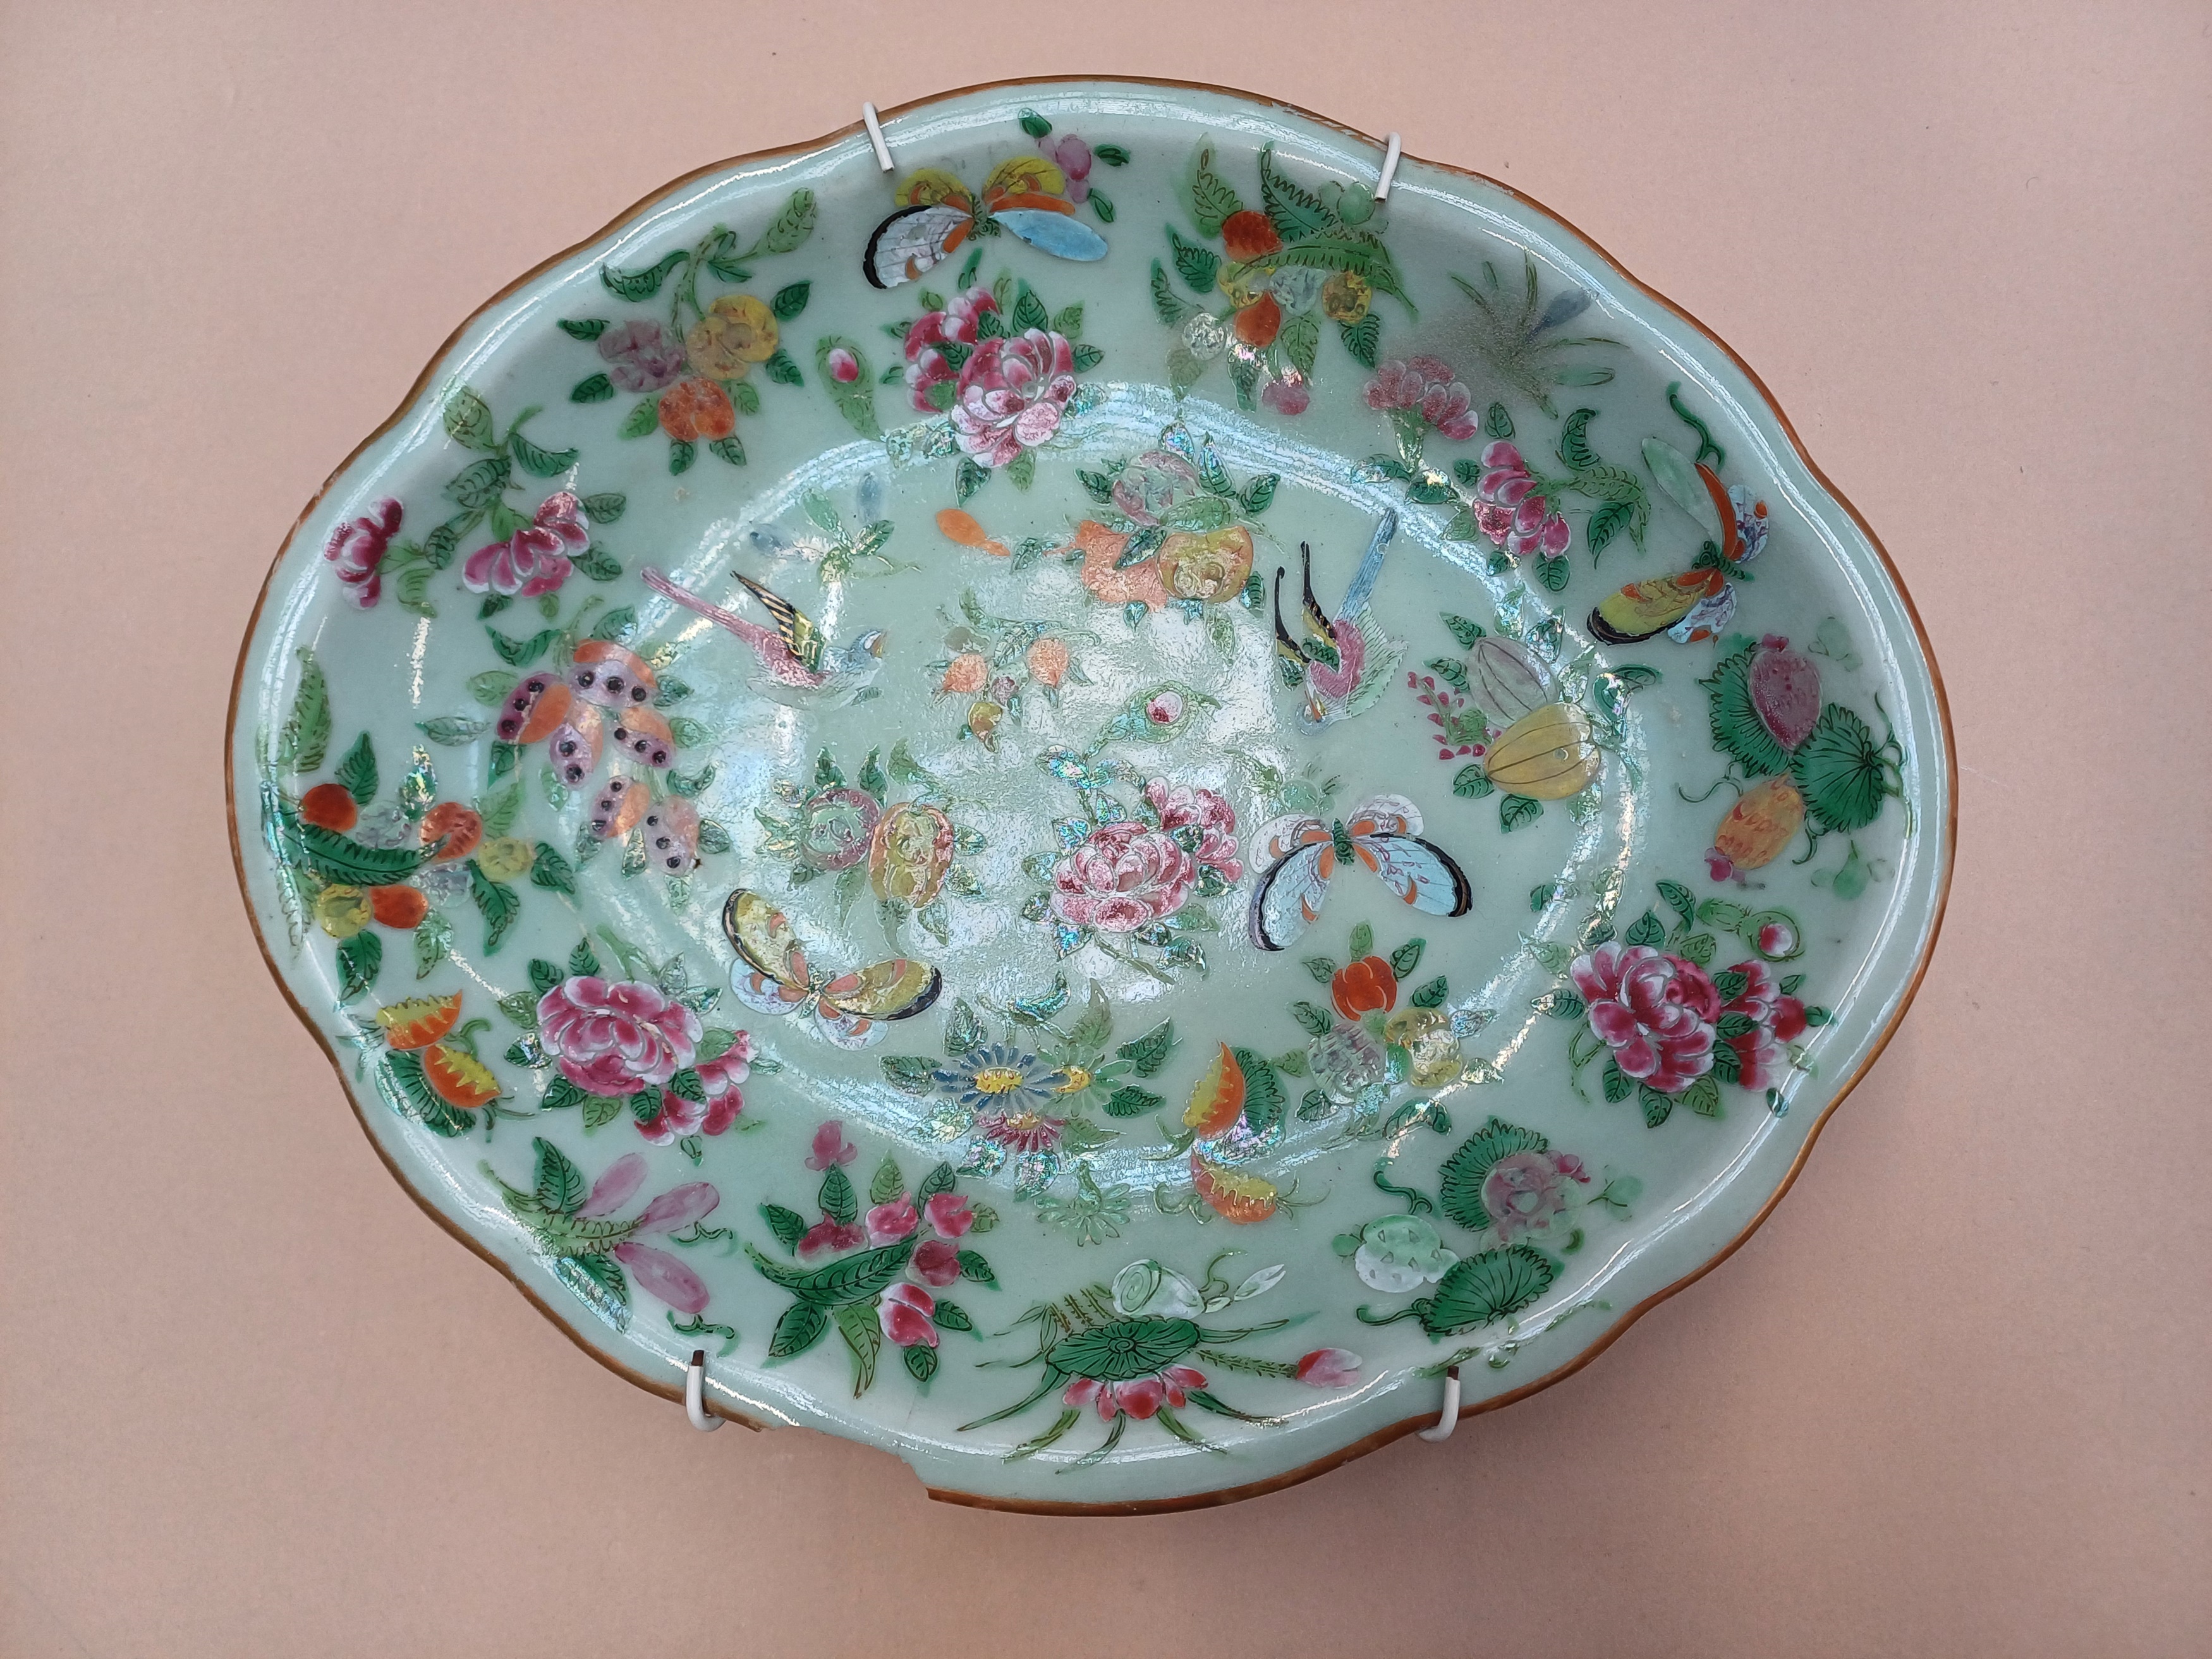 A GROUP OF CHINESE EXPORT FAMILLE-ROSE PORCELAIN 清十八至二十世紀 外銷粉彩瓷器一組 - Image 15 of 22